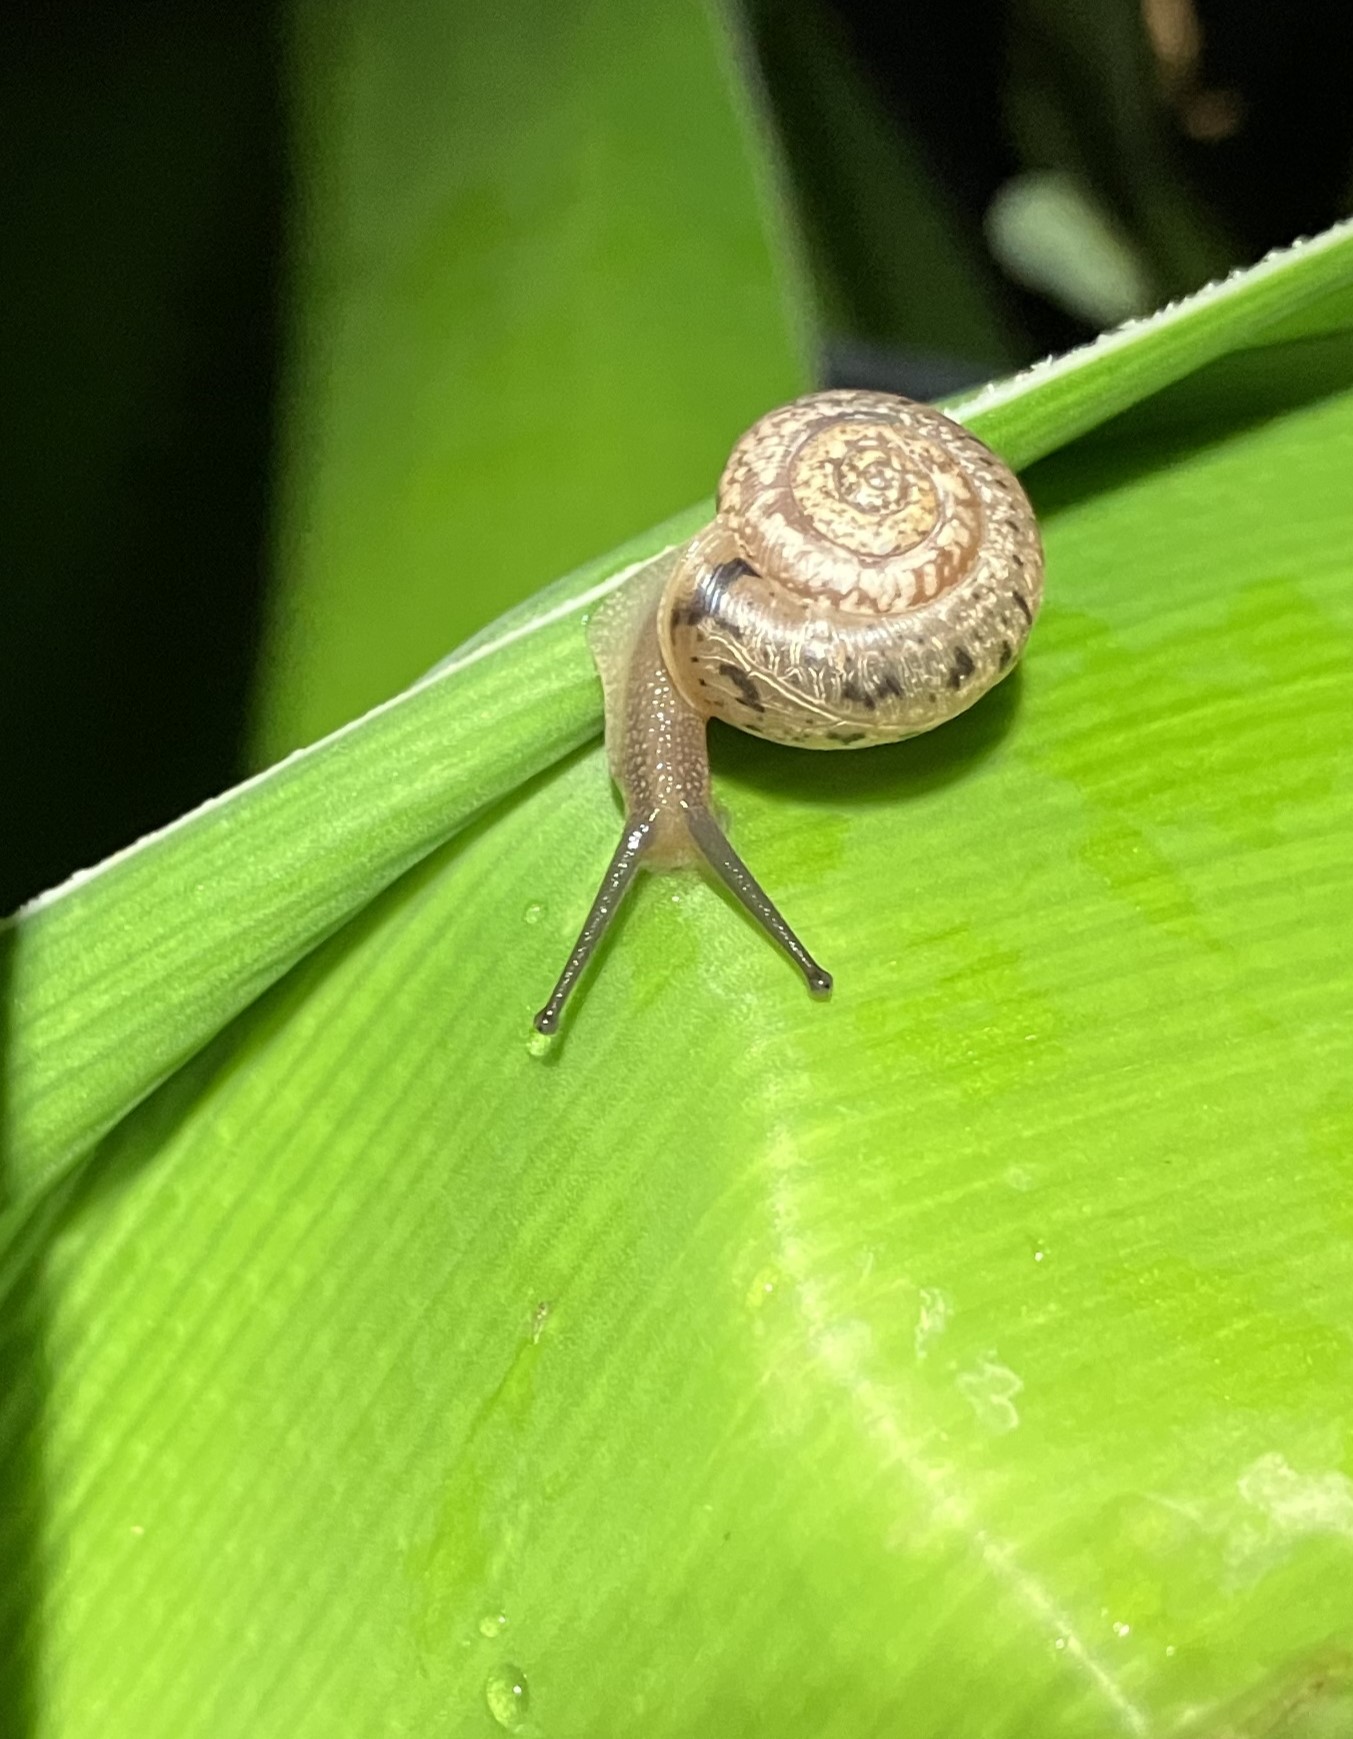 small snail on leaf